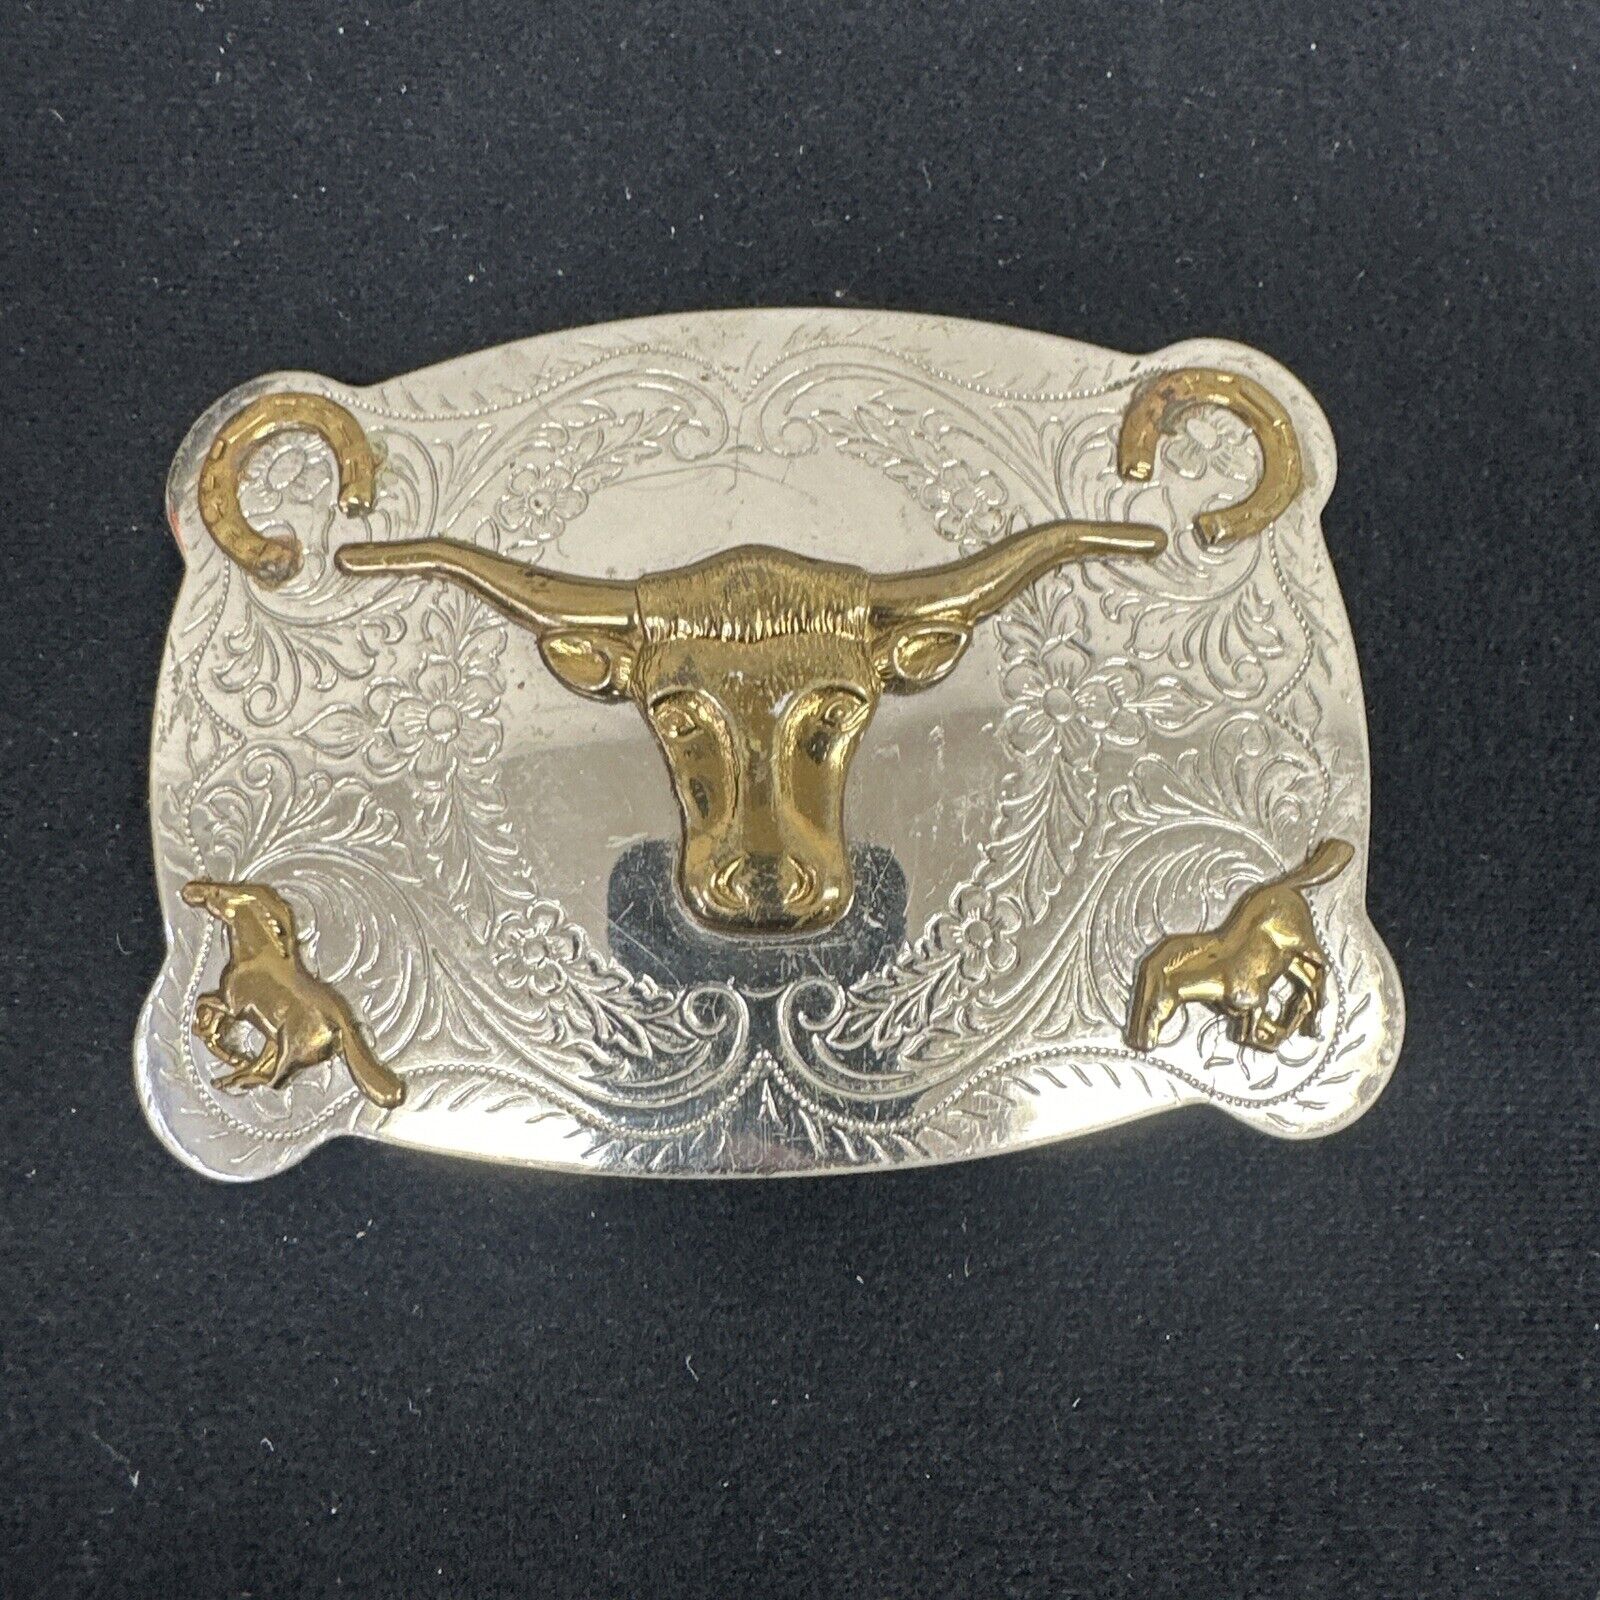 The Longhorn cow steer  western belt buckle with Lucky horseshoe accents 1960s